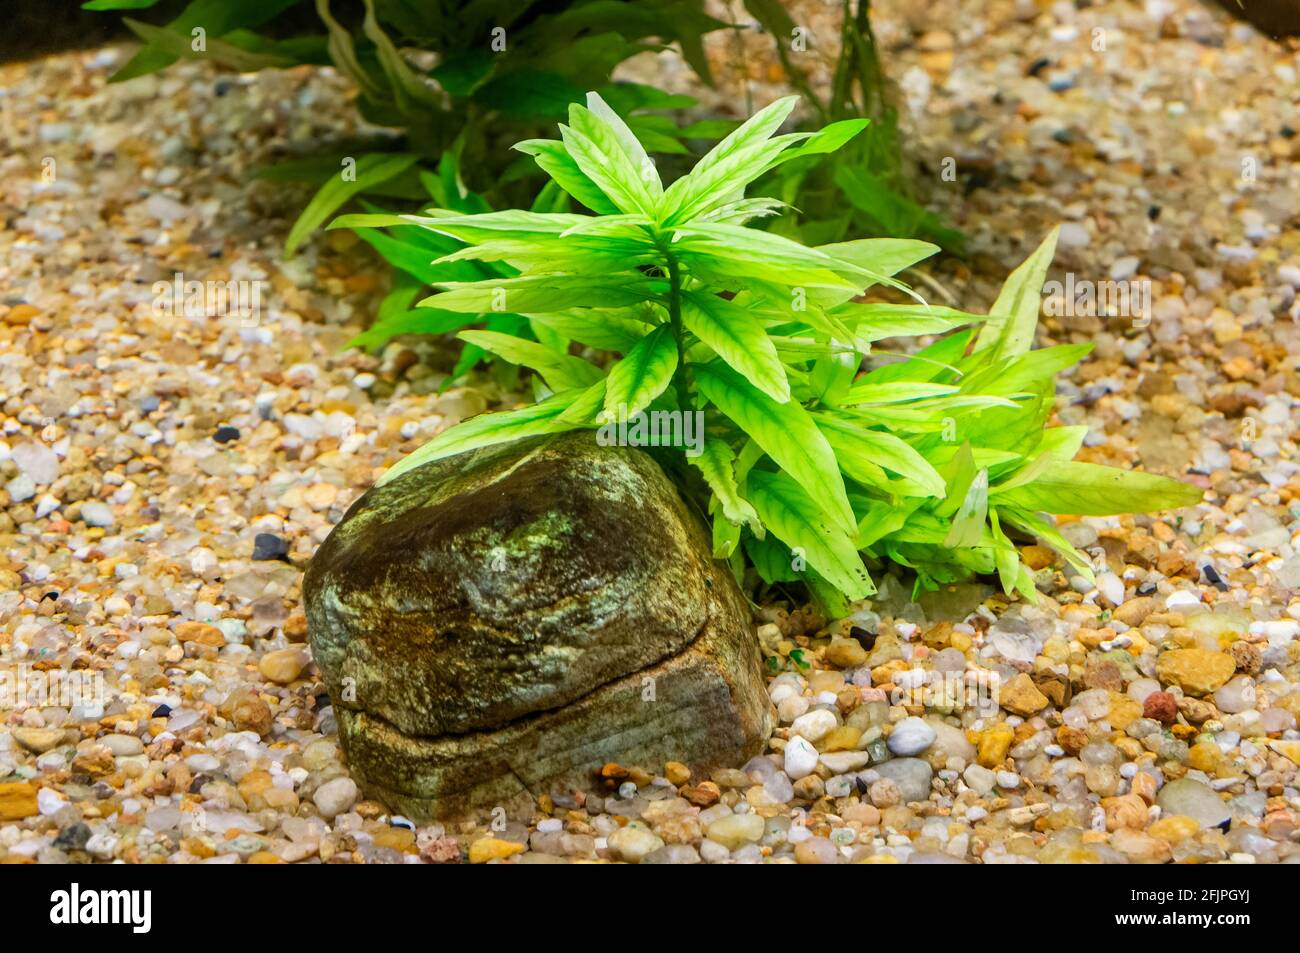 A fresh green plant at a small rock and surrounded by colorful gravel, part of the decoration at the bottom of one of fish tanks. Stock Photo